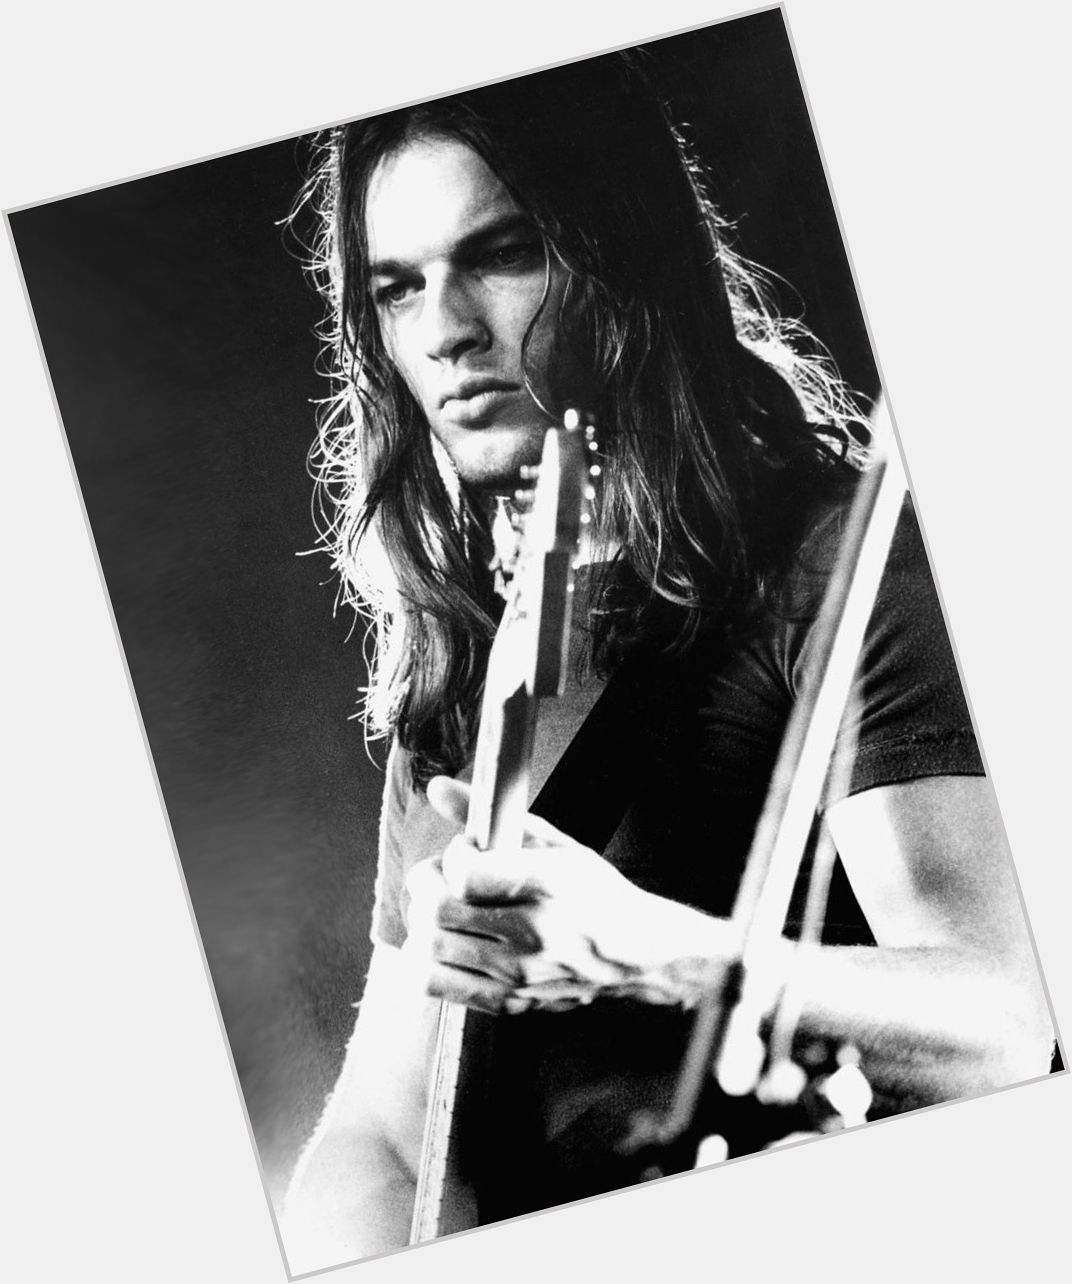 Happy Birthday David Gilmour who is 71 today  